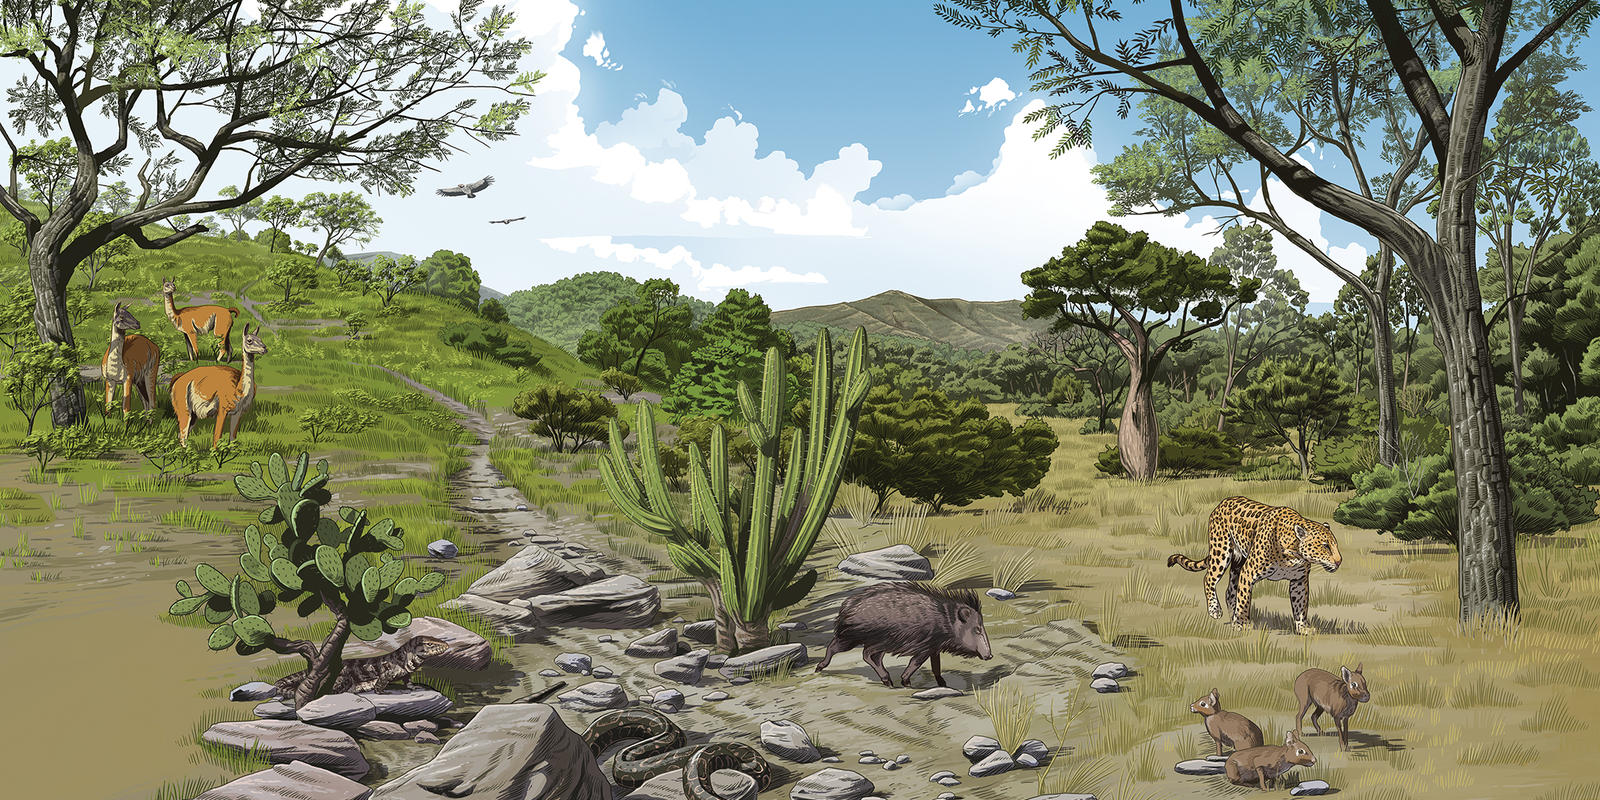 illustrated dry landscape of the Gran Chaco